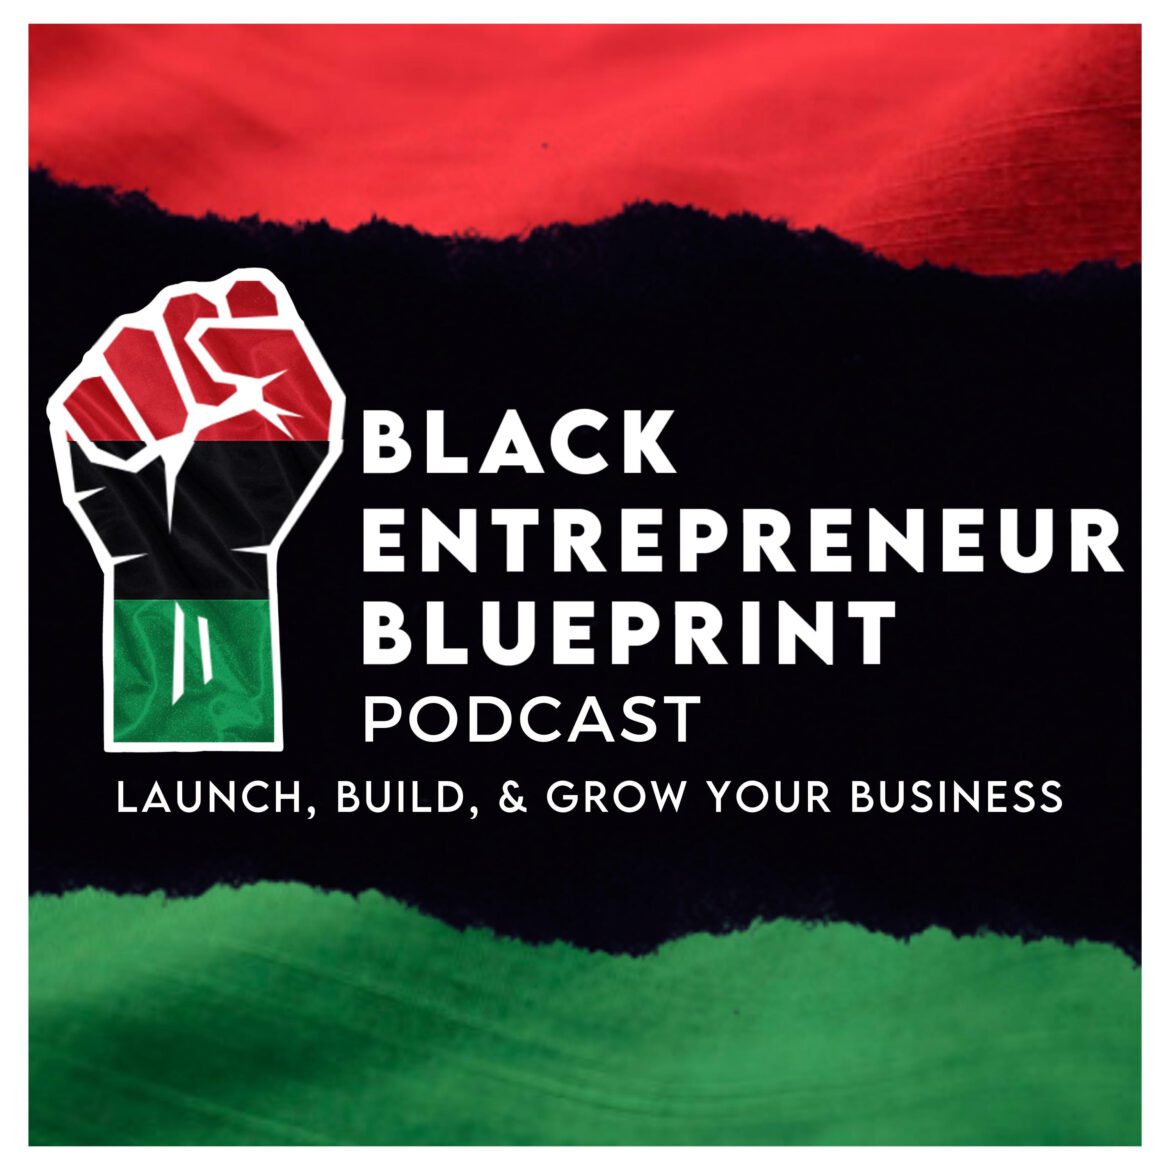 Black Podcasting - Black Entrepreneur Blueprint 414 - Jay Jones - Lead Generation Mastermind - Generating Leads For Your Business And Other Businesses